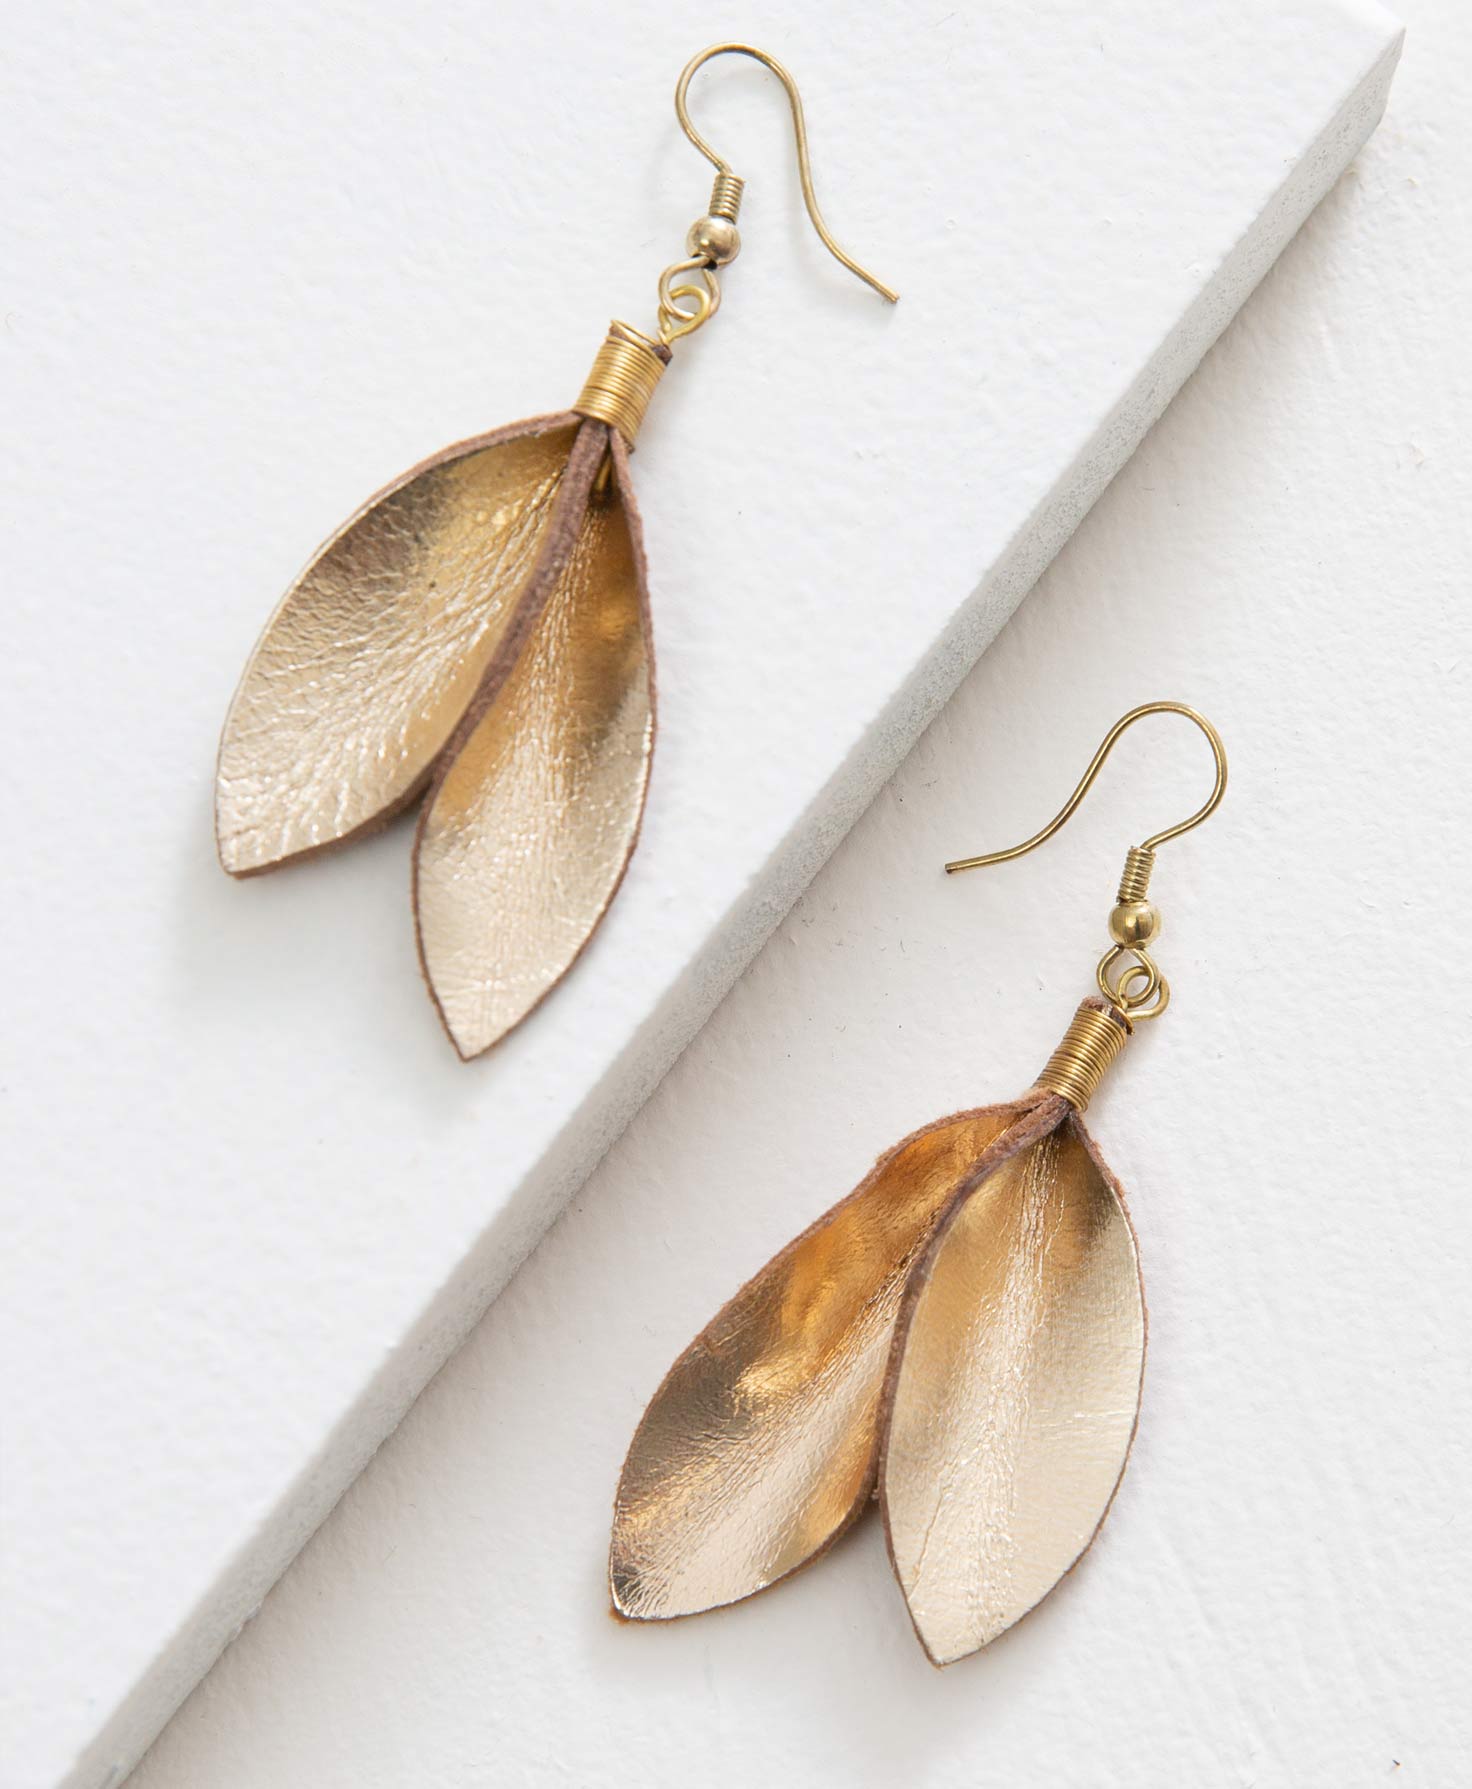 https://www.noondaycollection.info/img/product/leather-leaf-earrings/leather-leaf-earrings-large.jpg